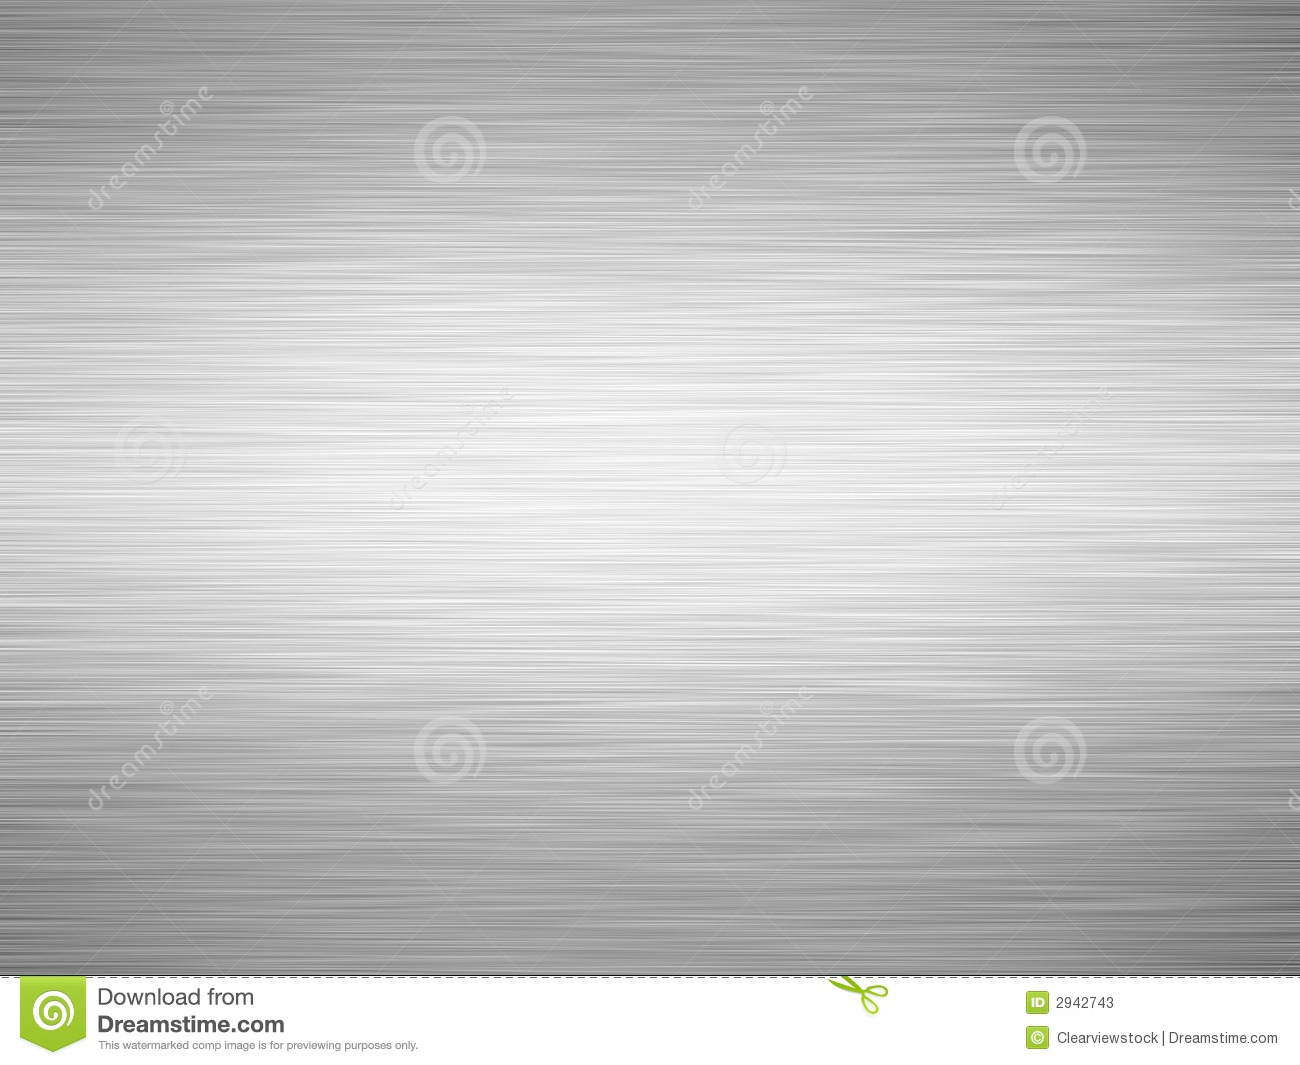 Brushed Sheet Metal Plate Background With Holes Grain Stock